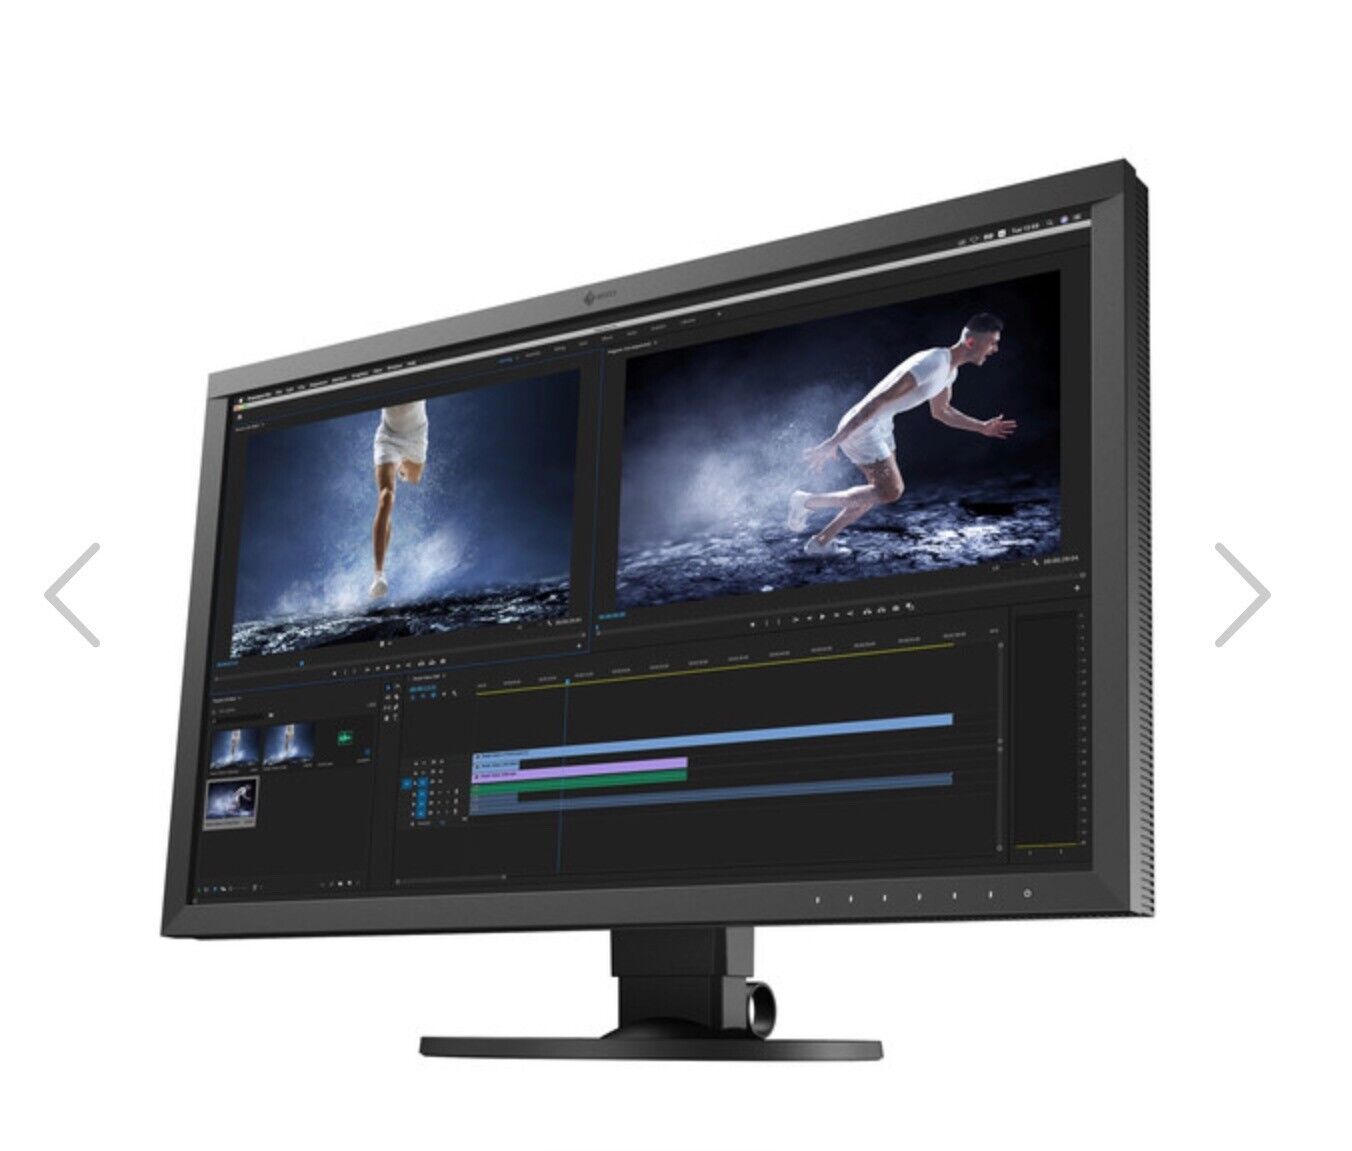 EIZO ColorEdge CS2740 16:9 Wide Tilts 4K IPS Monitor Priced to Sell